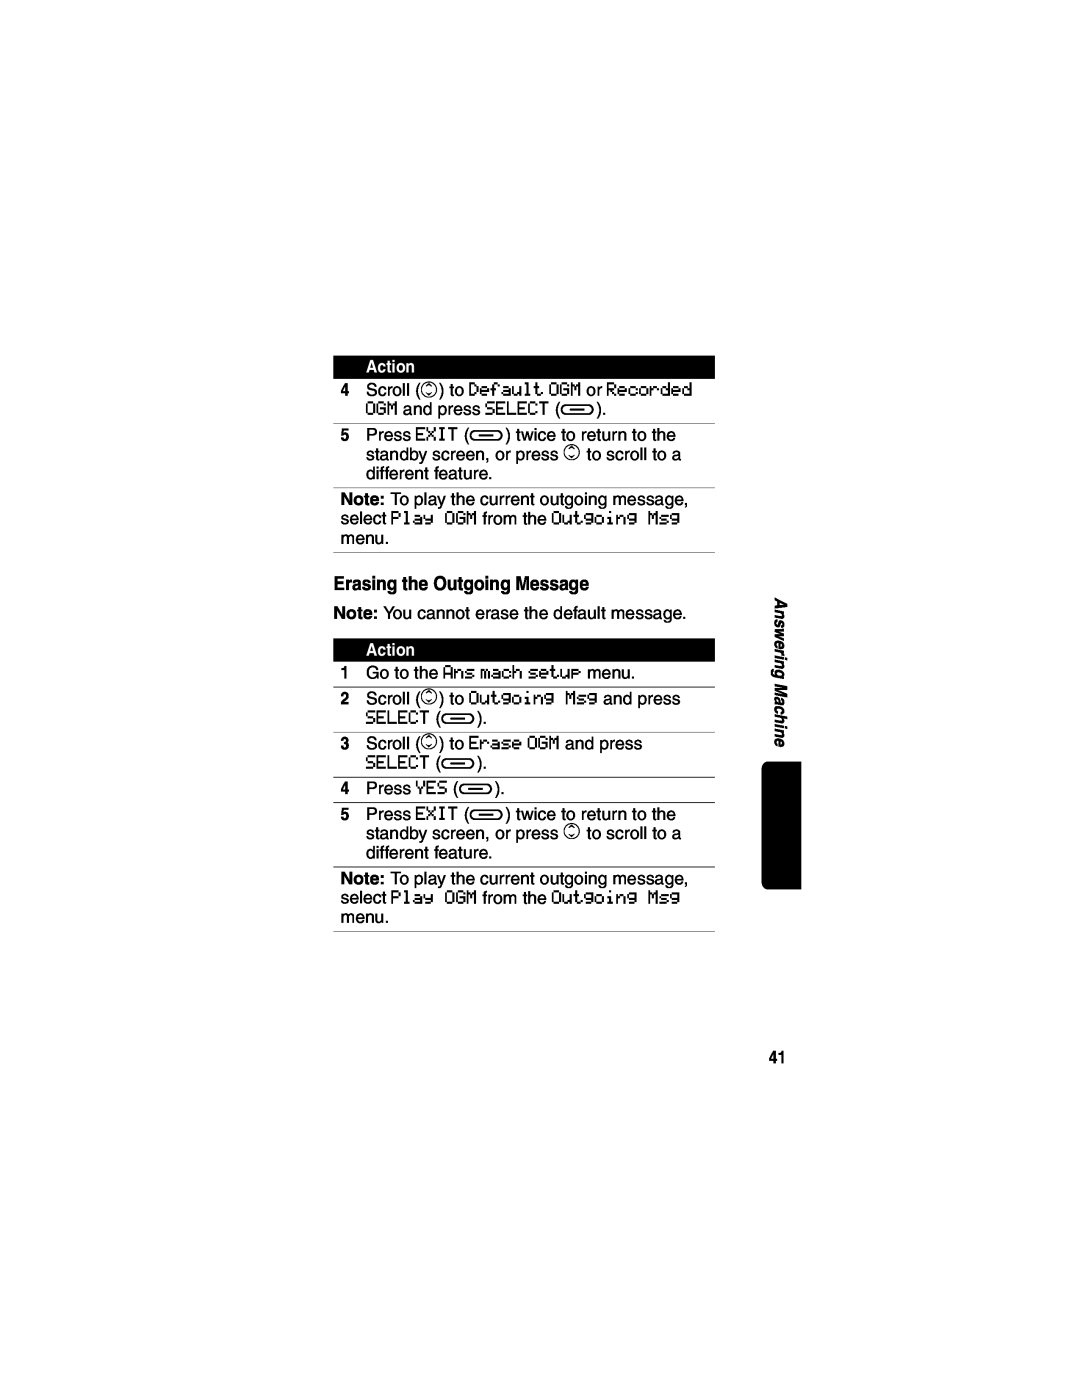 Motorola MD490 manual Erasing the Outgoing Message, Action 